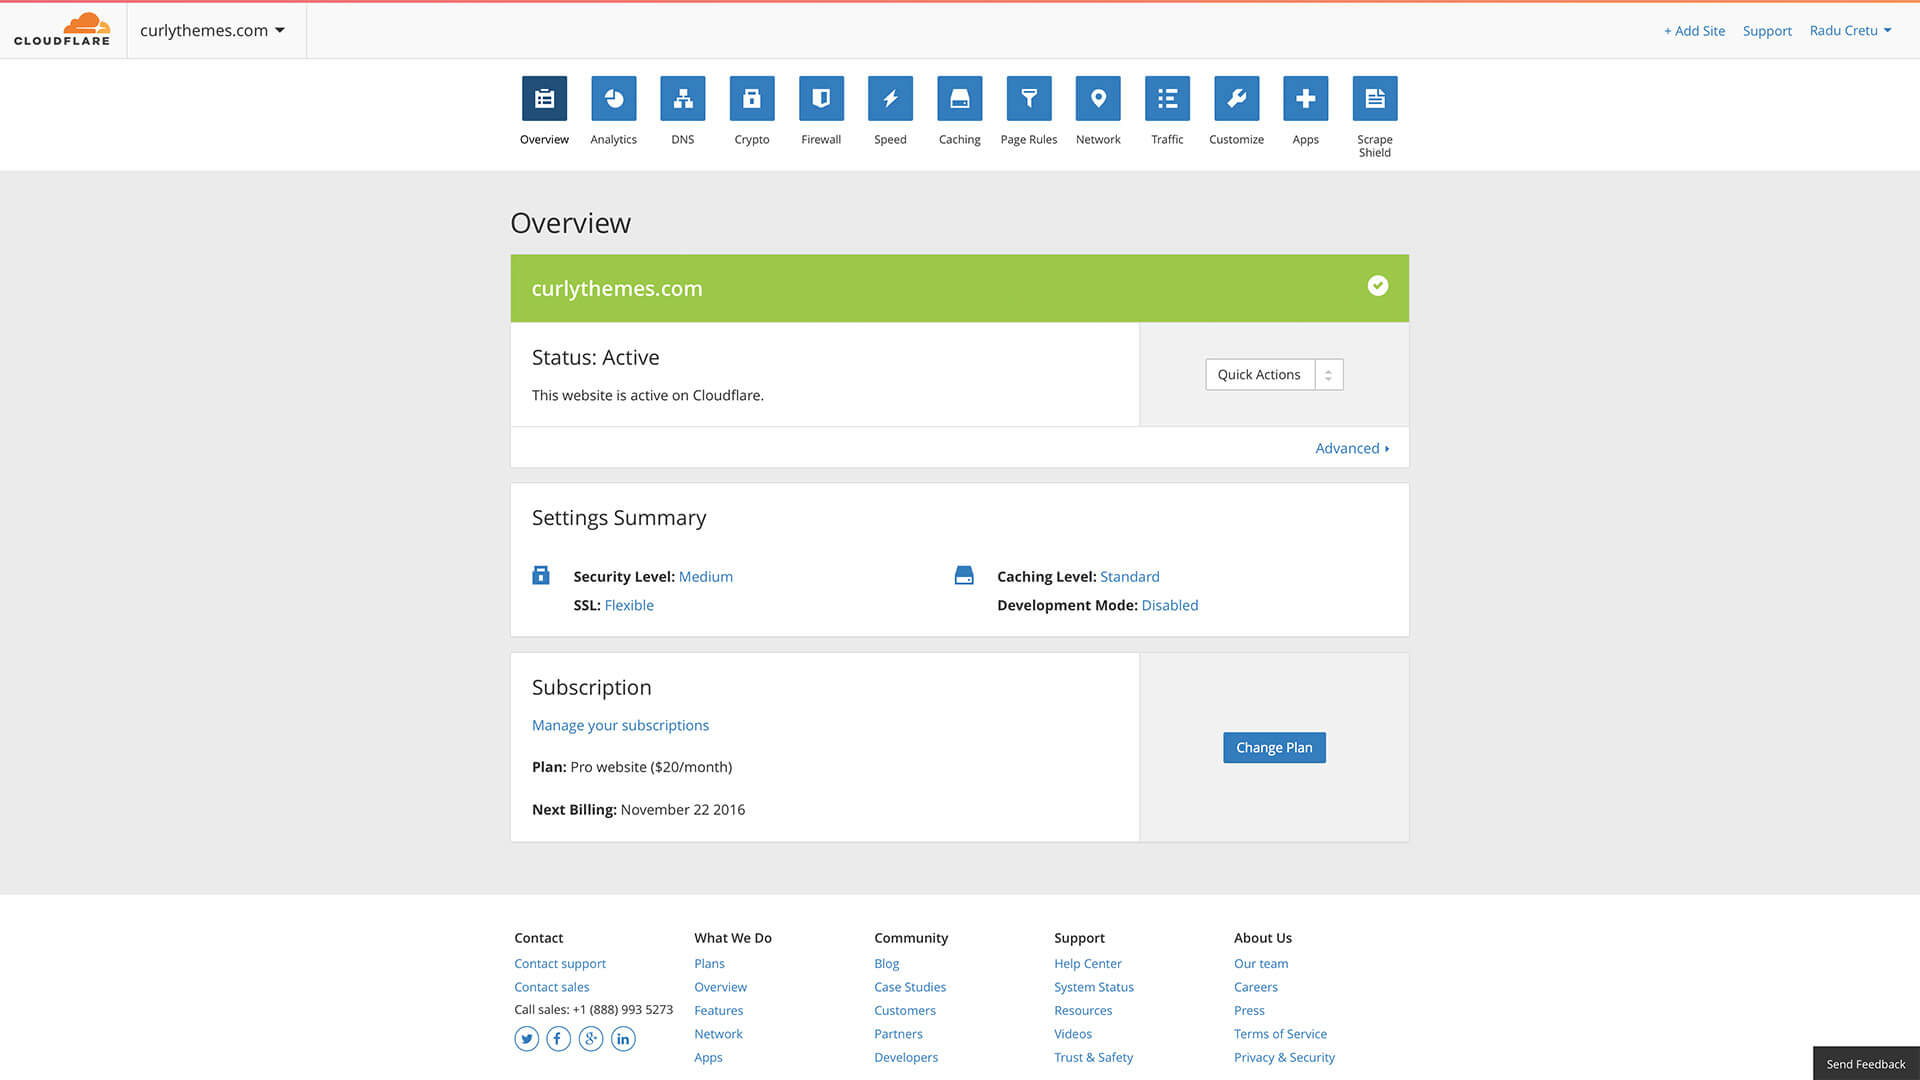 Cloudflare Dashboard helps WordPress in terms of speed, security and reliability